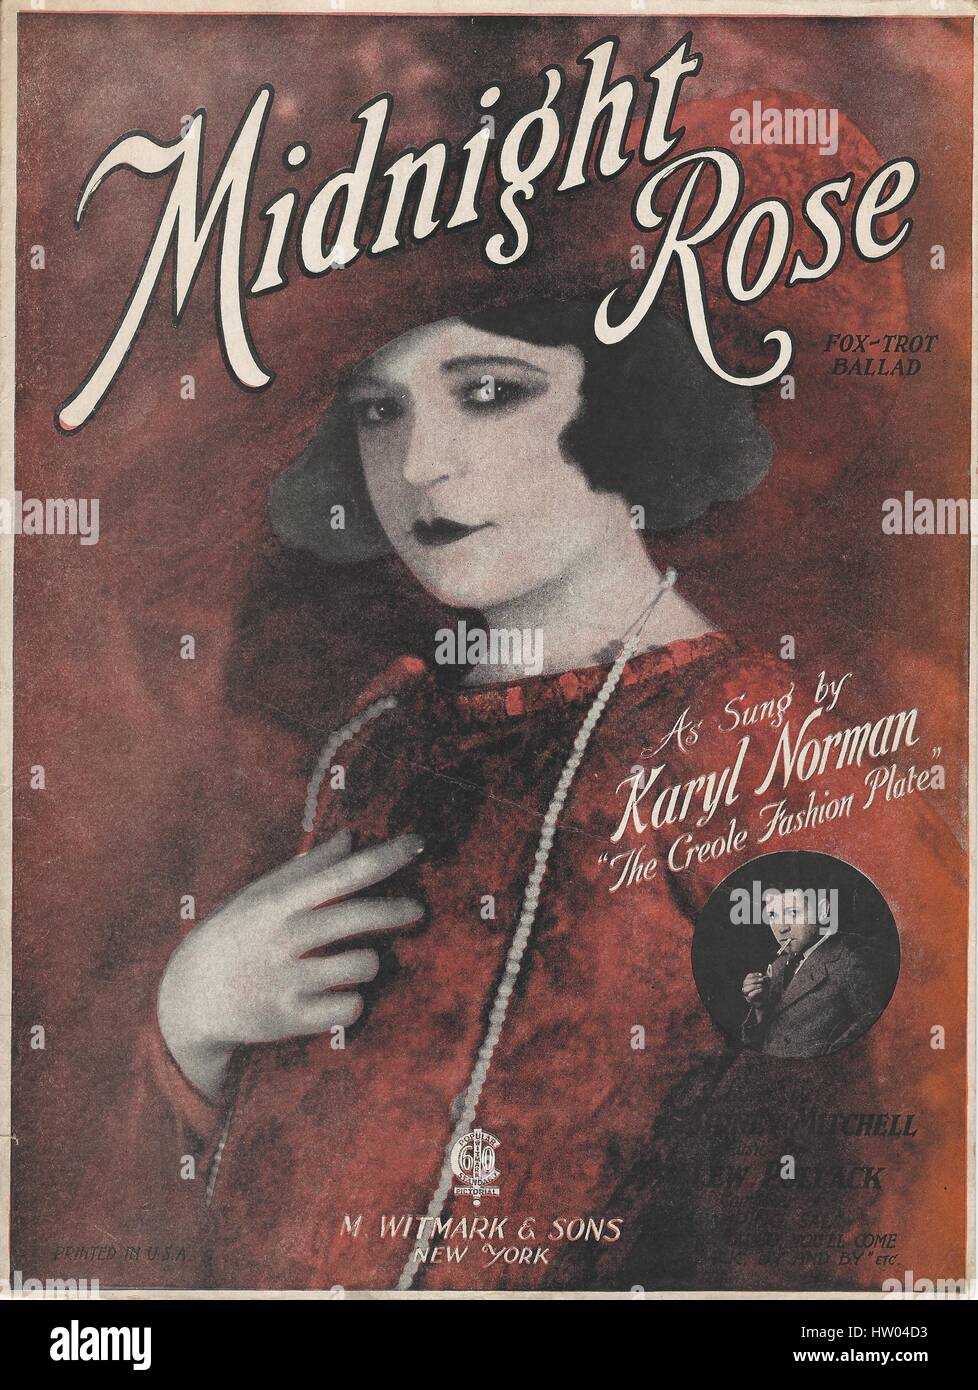 'Midnight Rose' 1923 Karyl Norman Female Impersonator Sheet Music Cover Stock Photo